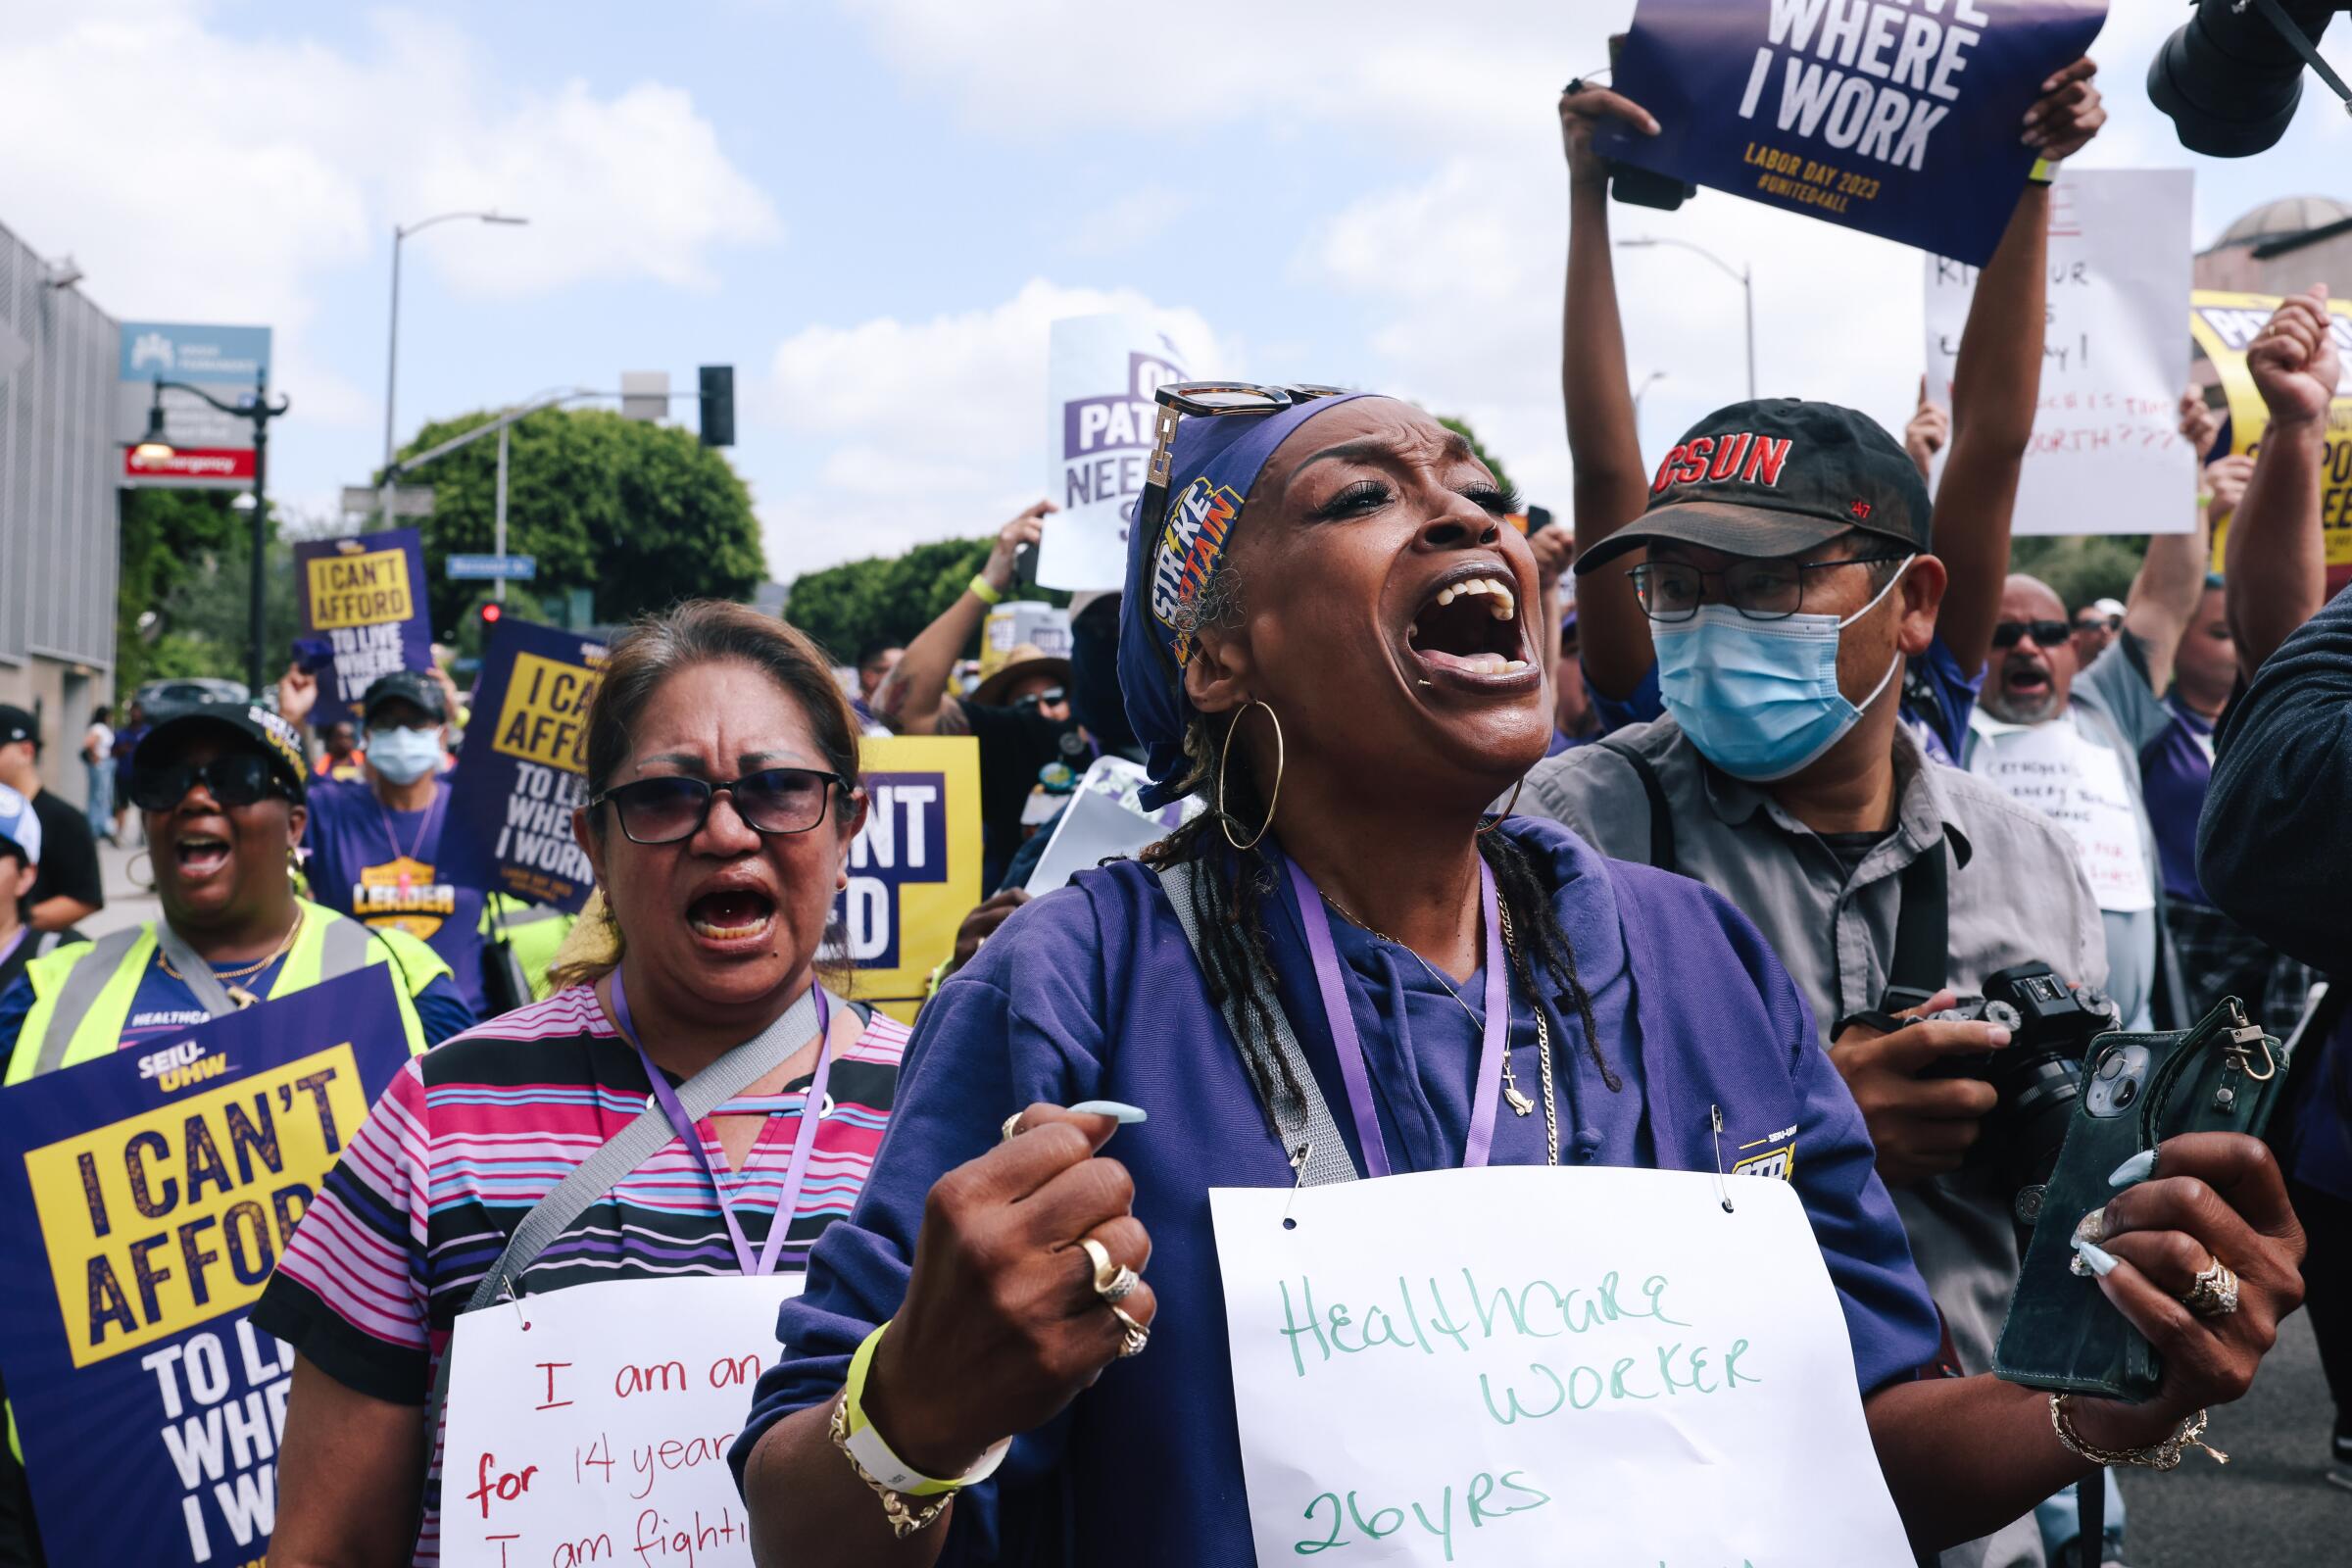 Healthcare workers hold signs and chant during a protest.